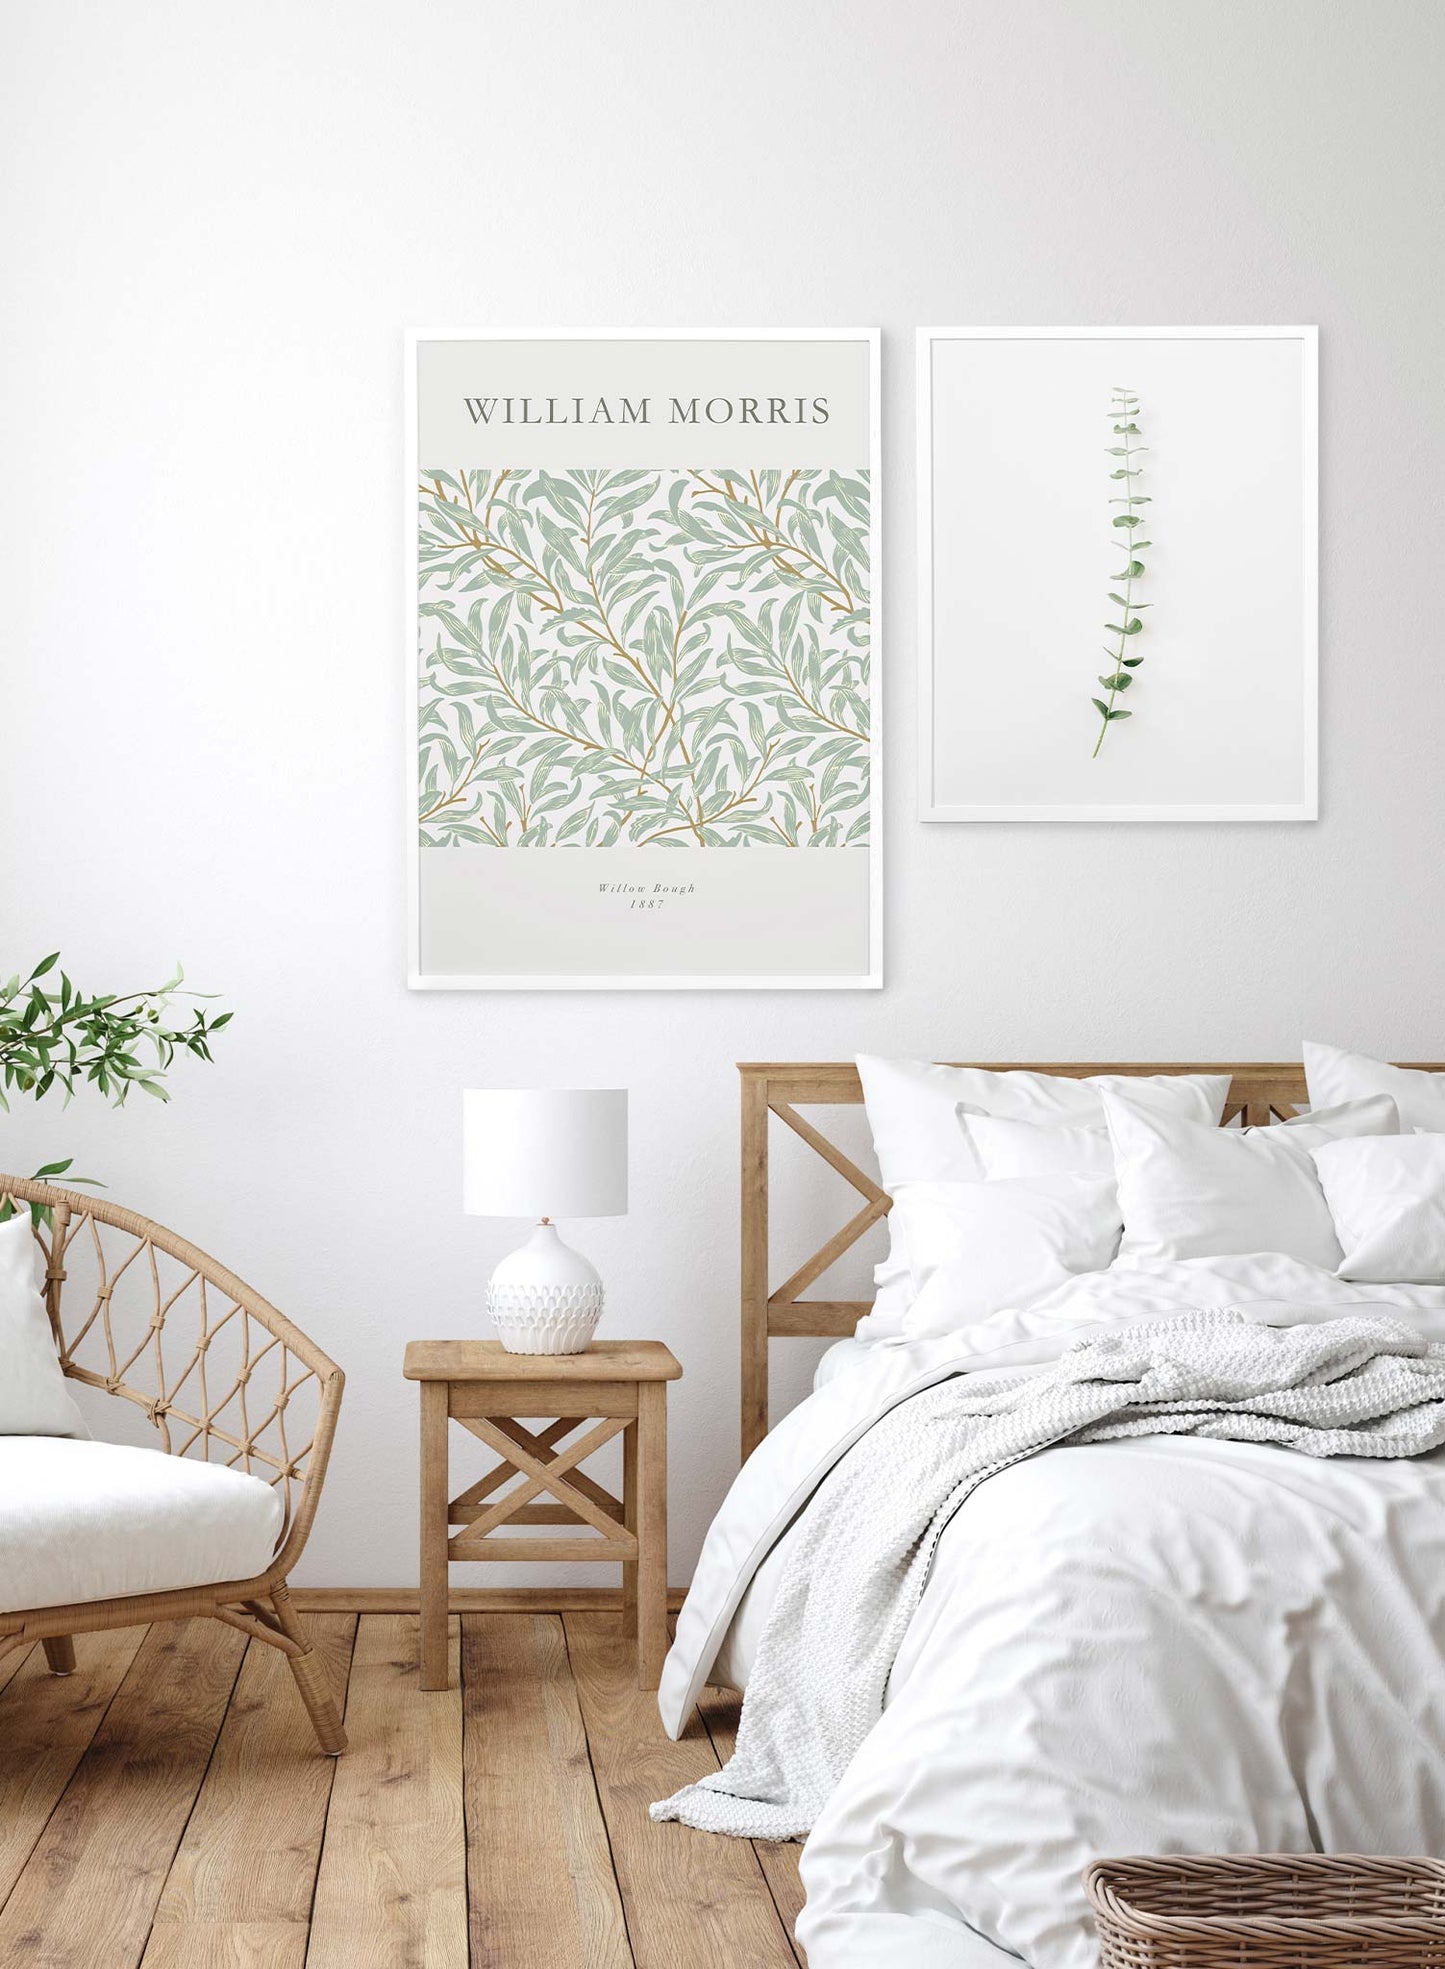 Willow Bough is a minimalist artwork by Opposite Wall of William Morris's Willow Bough from 1887.